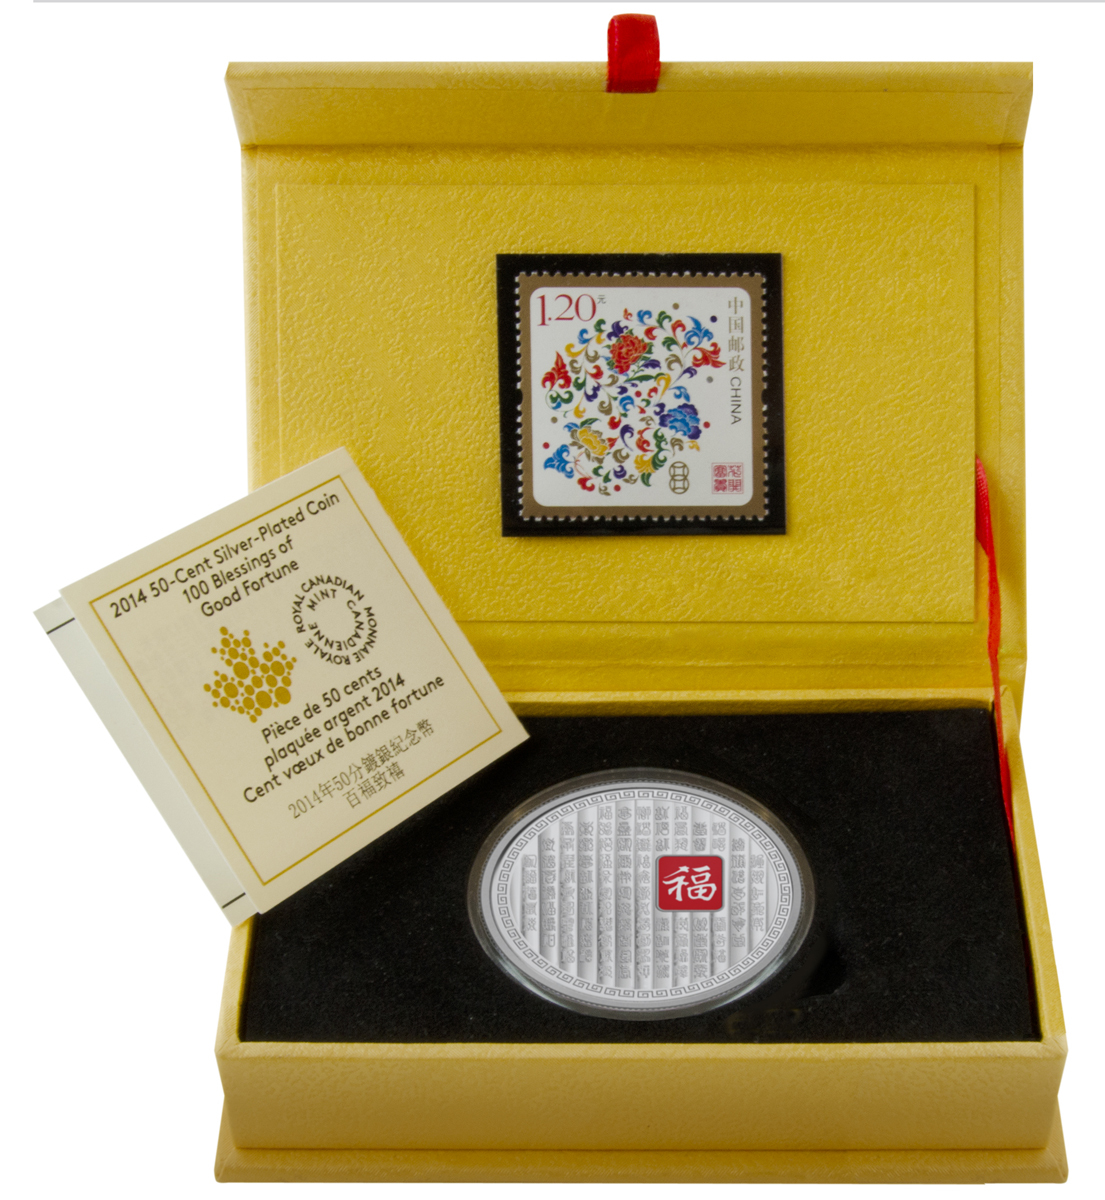 CANADA 50 cents 2013 100 Blessings of Good Fortune Coin with Stamp Set